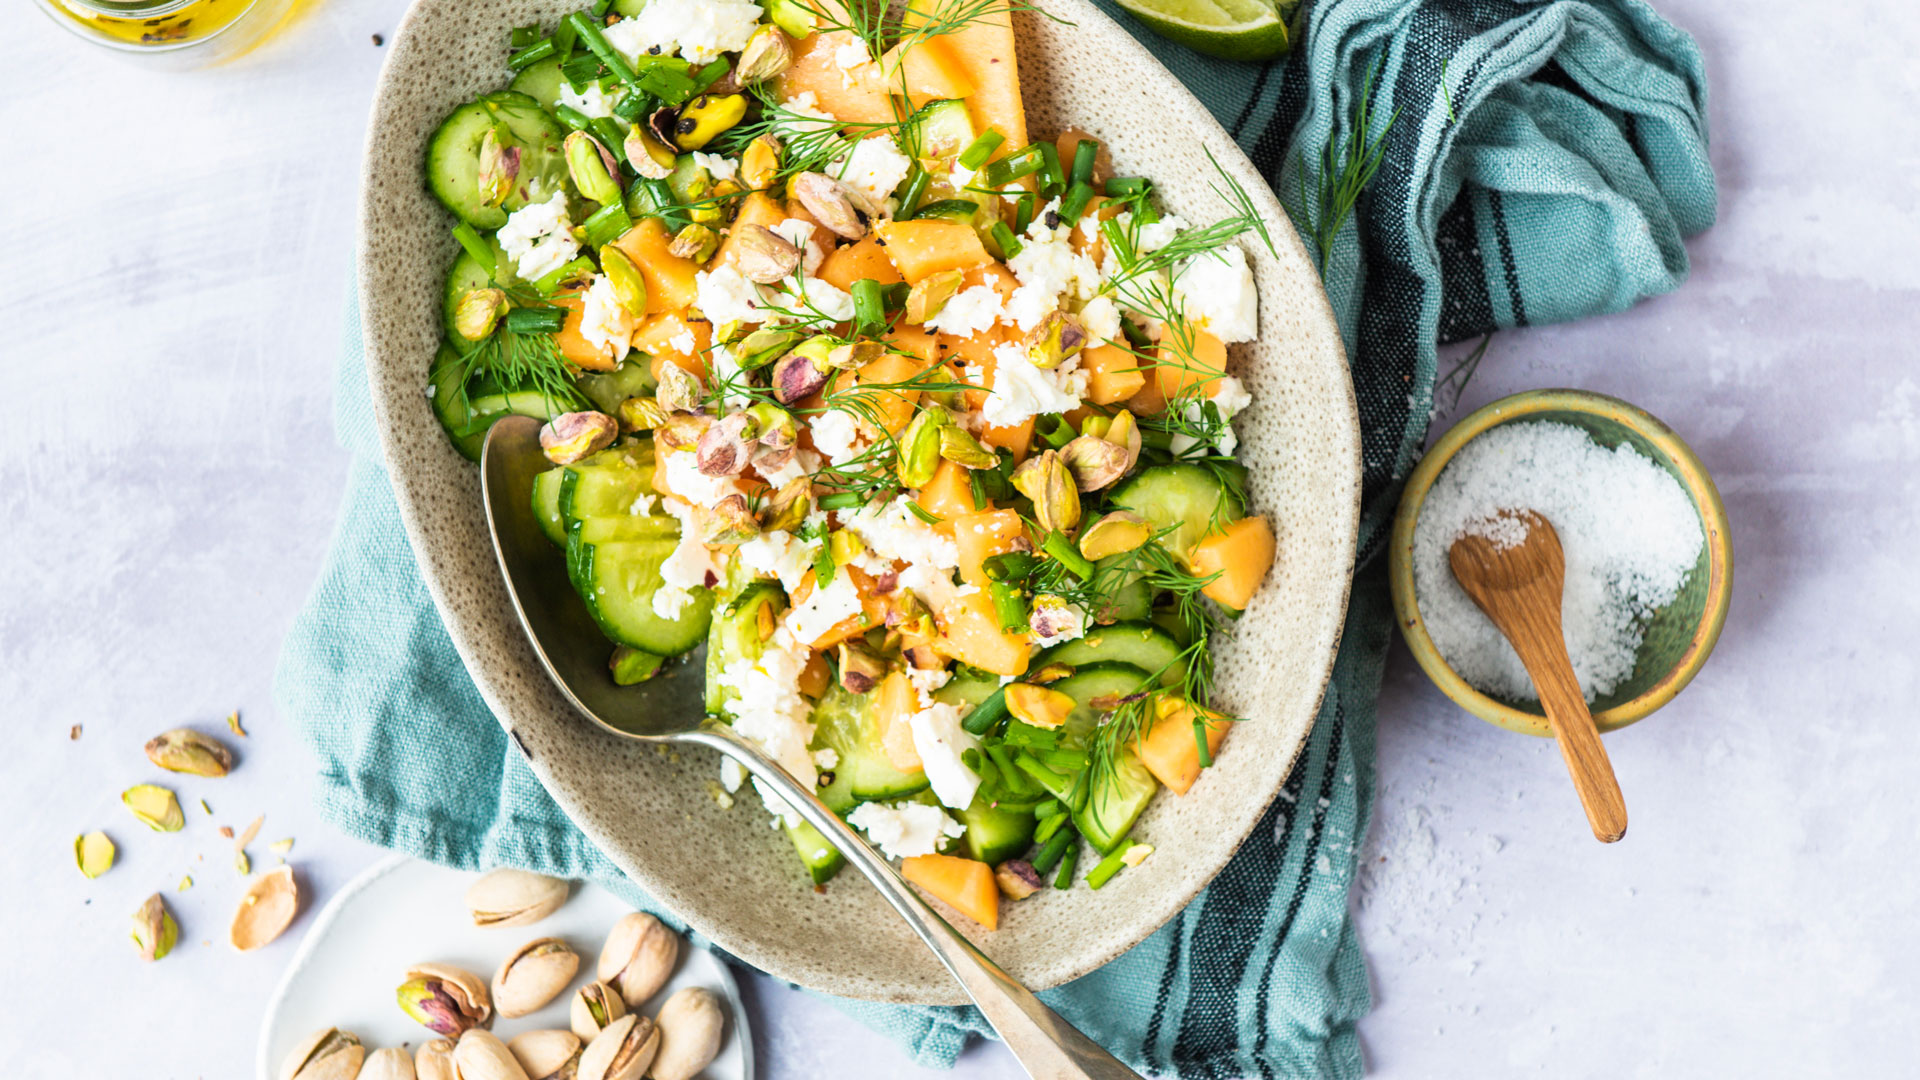 Summer Cucumber-Melon Salad with Roasted Pistachios and Feta